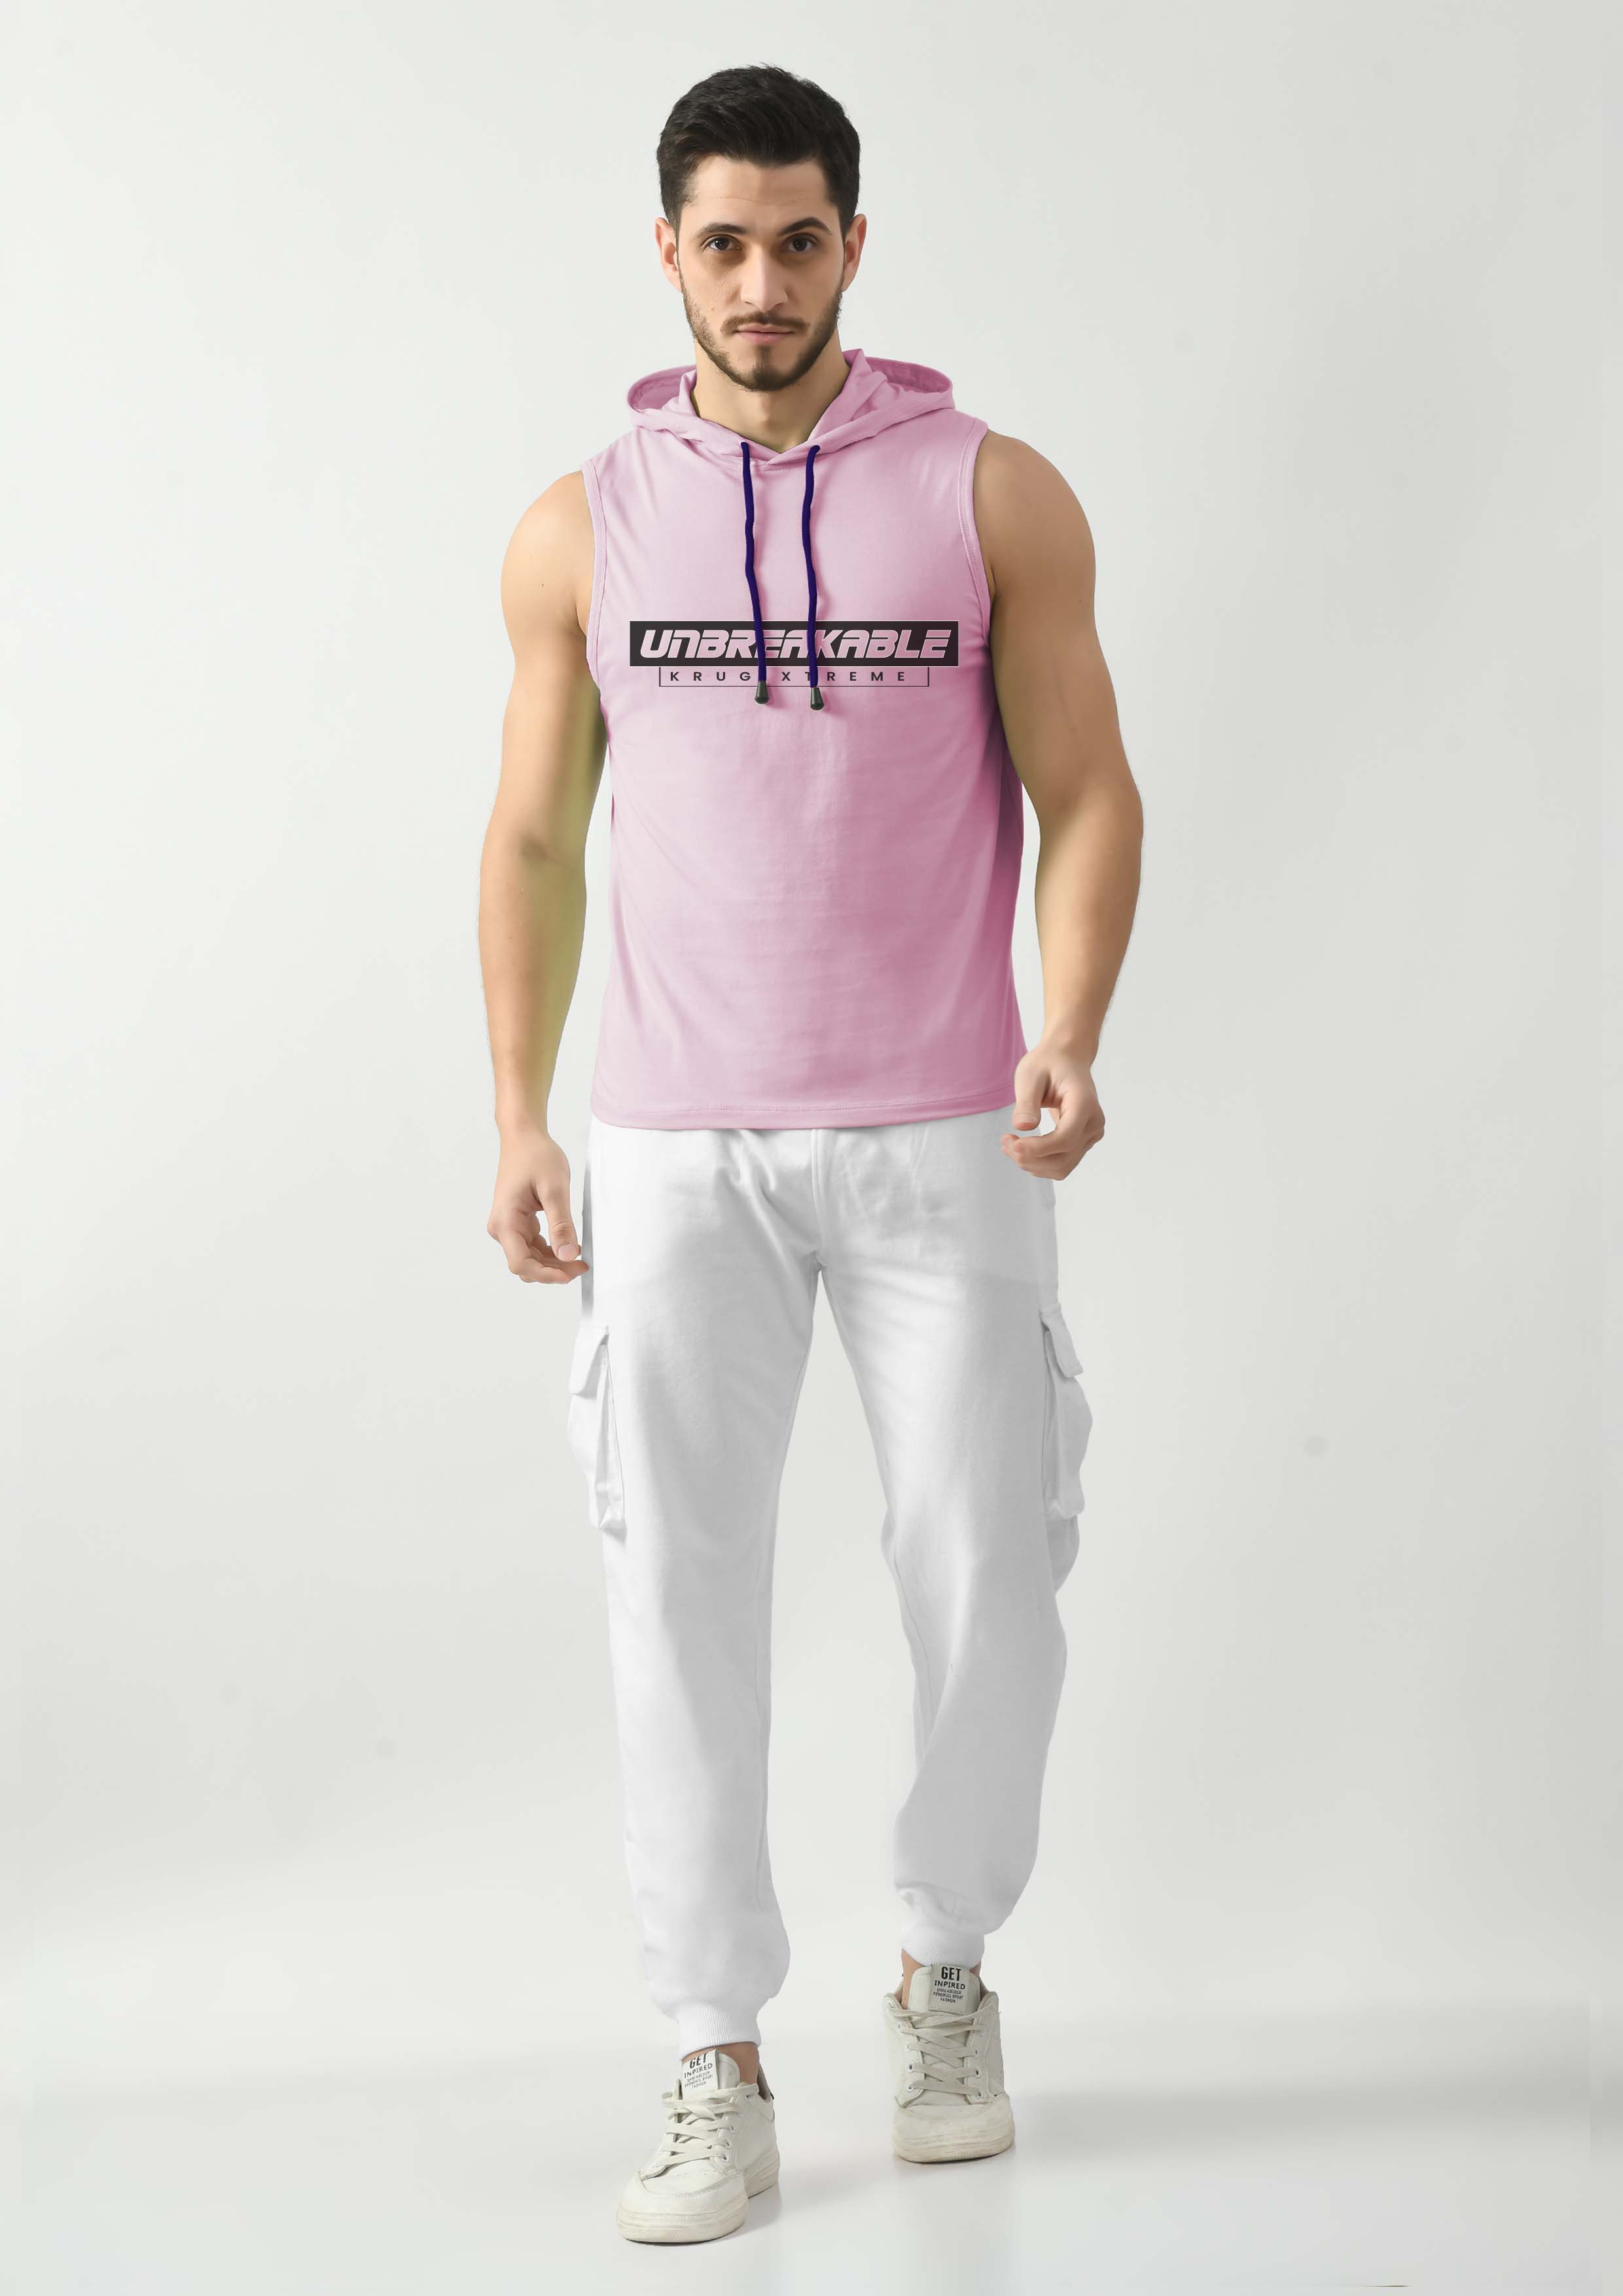 Flamingo Pink Tank Top for Men with Hoodie